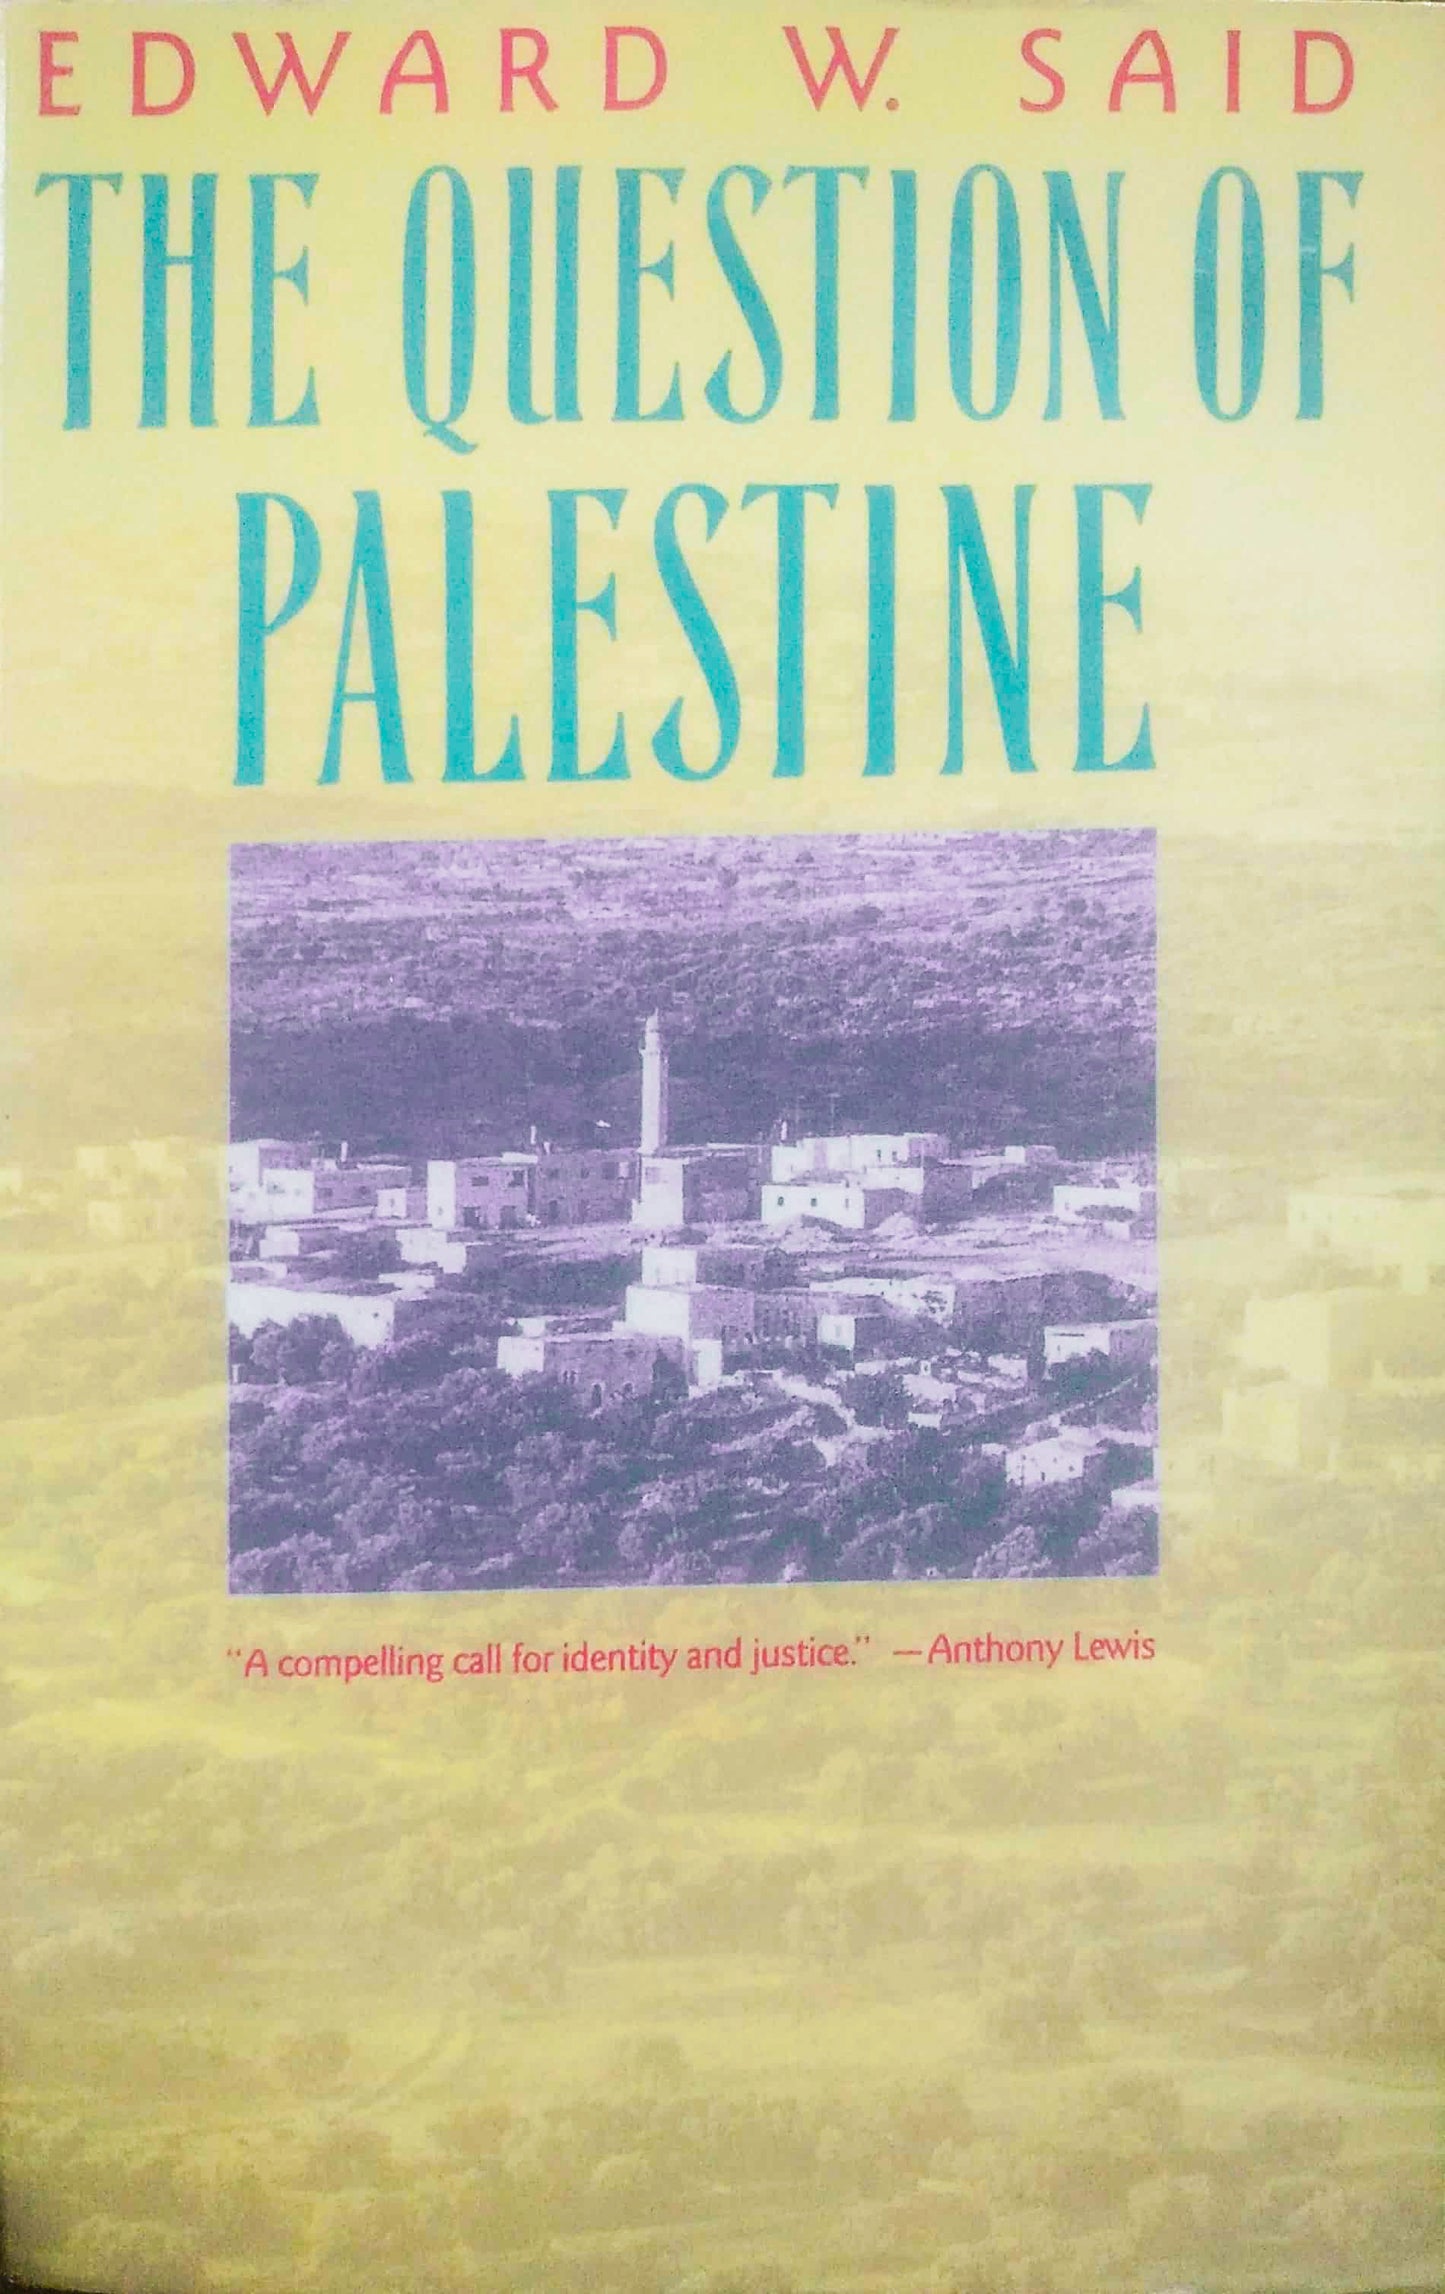 The Question Of Palestine by Edward W. Said at BIBLIONEPAL Bookstore